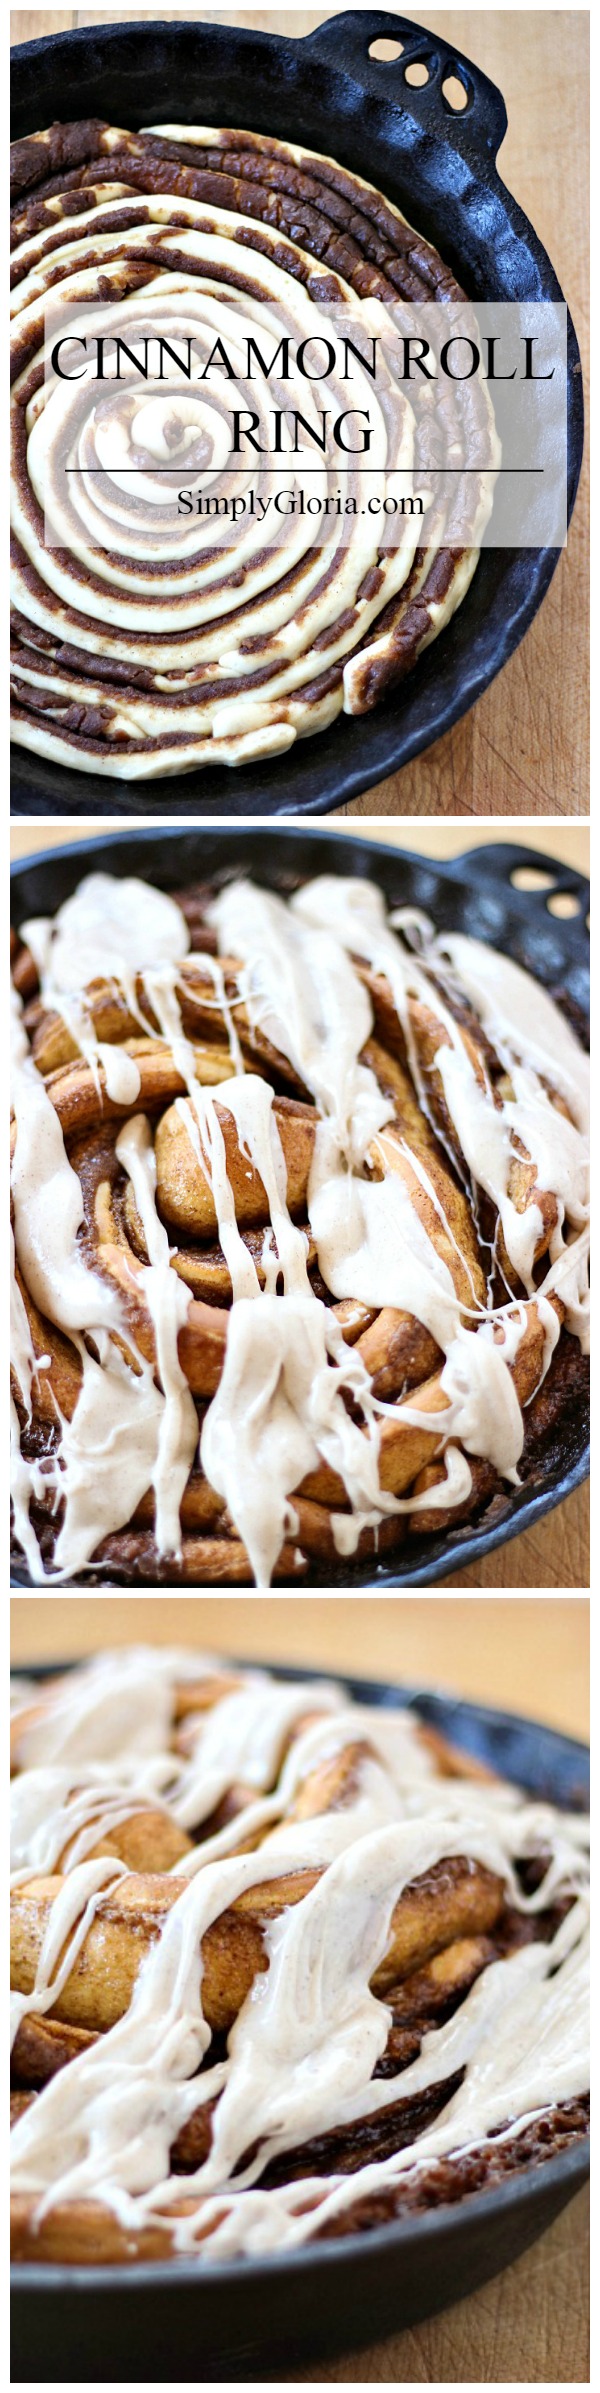 How to make Cinnamon Roll Ring with Cinnamon Cream Cheese Frosting via SimplyGloria.com